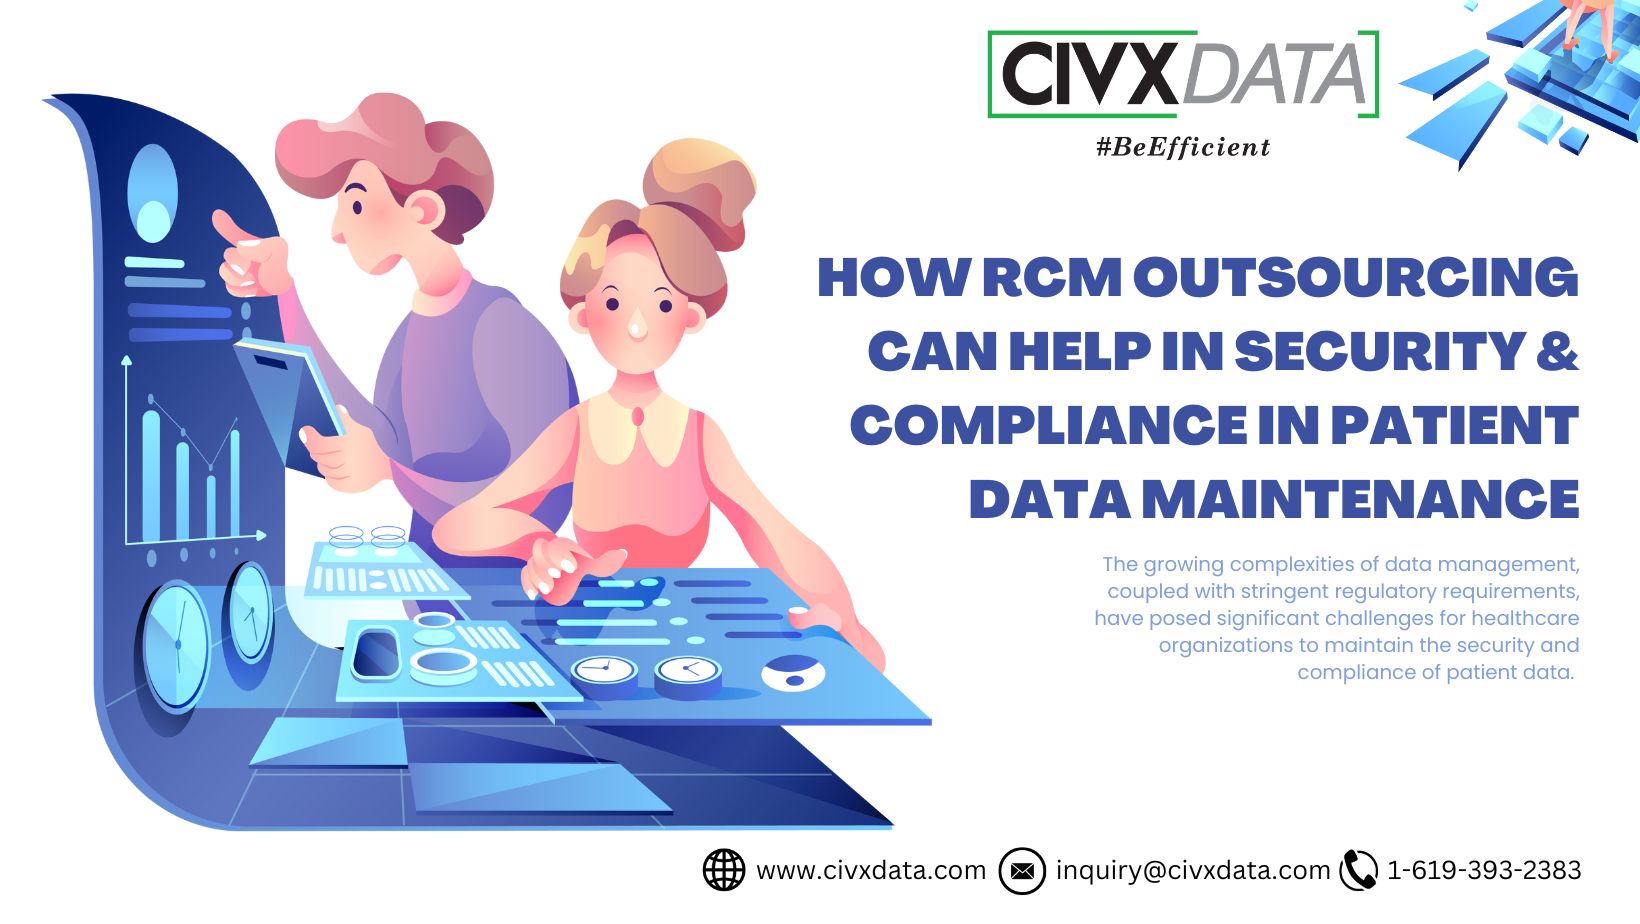 Top Ways in Which RCM Outsourcing Can Help in Security and Compliance in Patient Data Maintenance